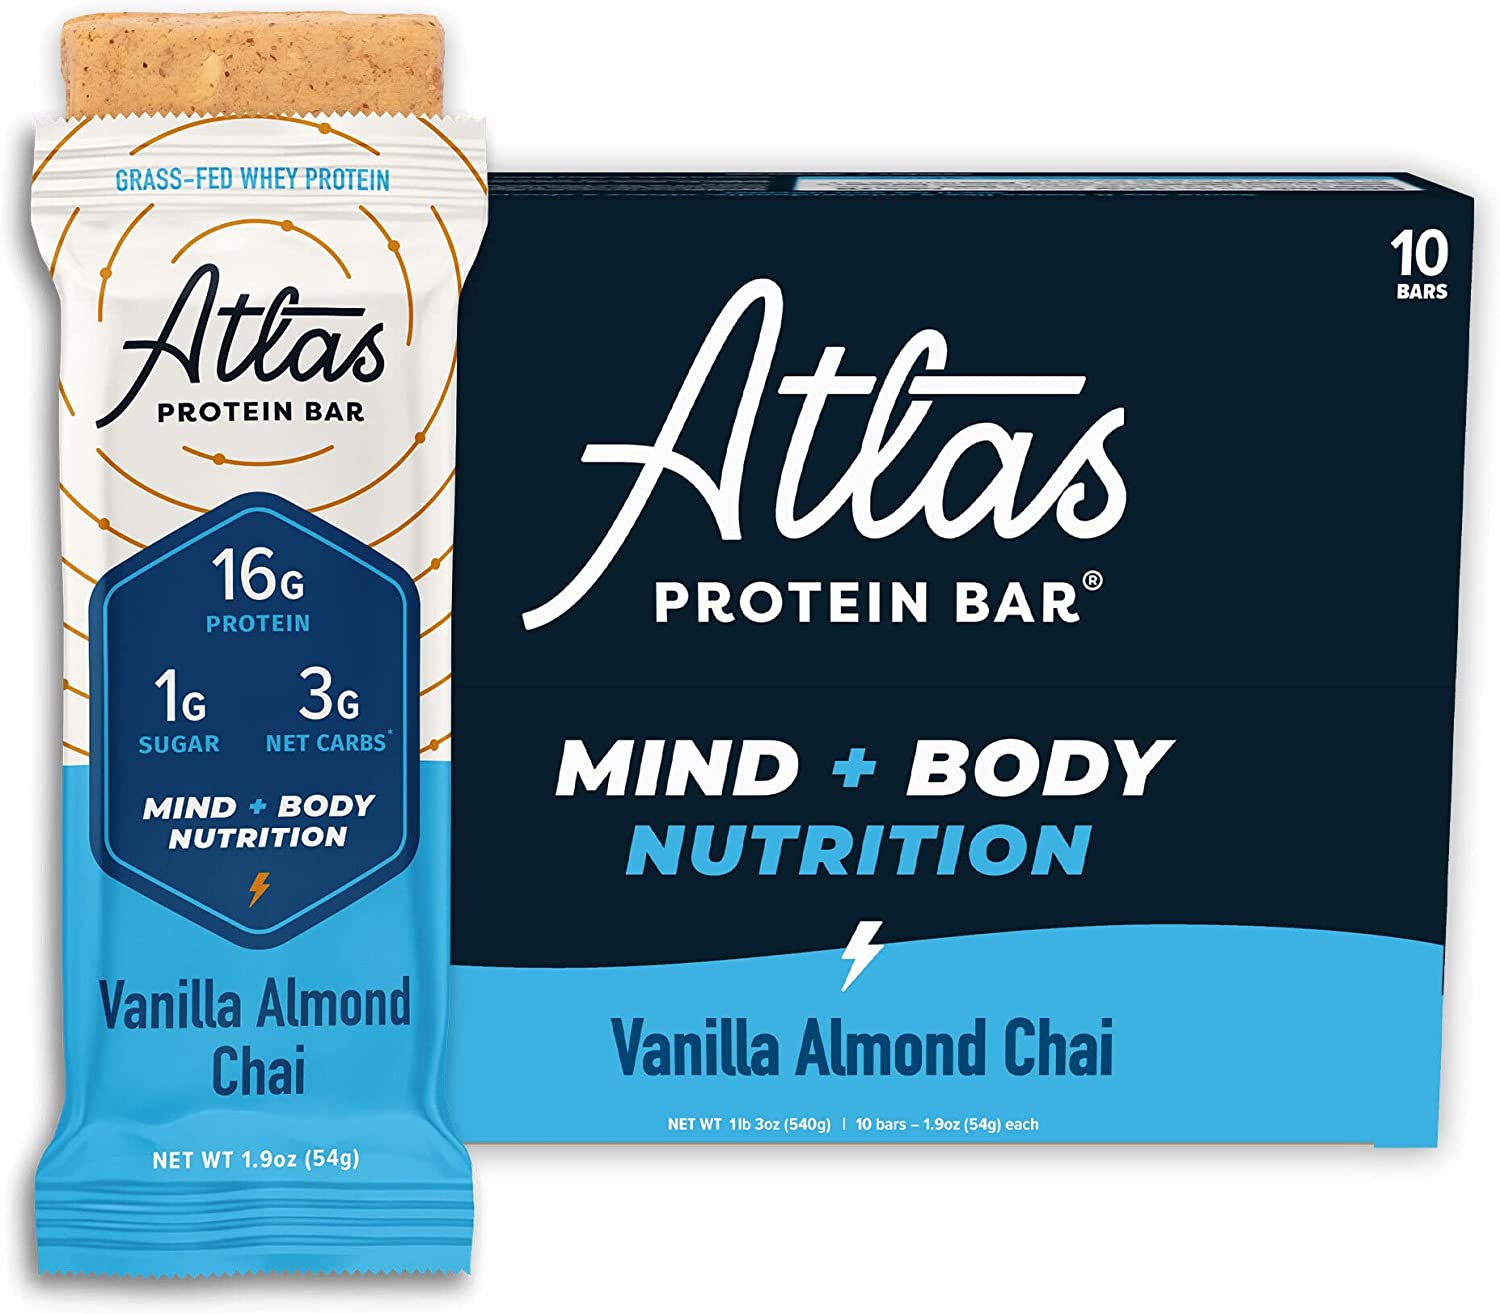 Atlas Protein Bar, Meal Replacement, Keto-Friendly Snack, Grass-Fed Whey, Organic Ashwagandha, Low Sugar, Low Carb, Gluten Free, 10 pack, Vanilla Almond Chai